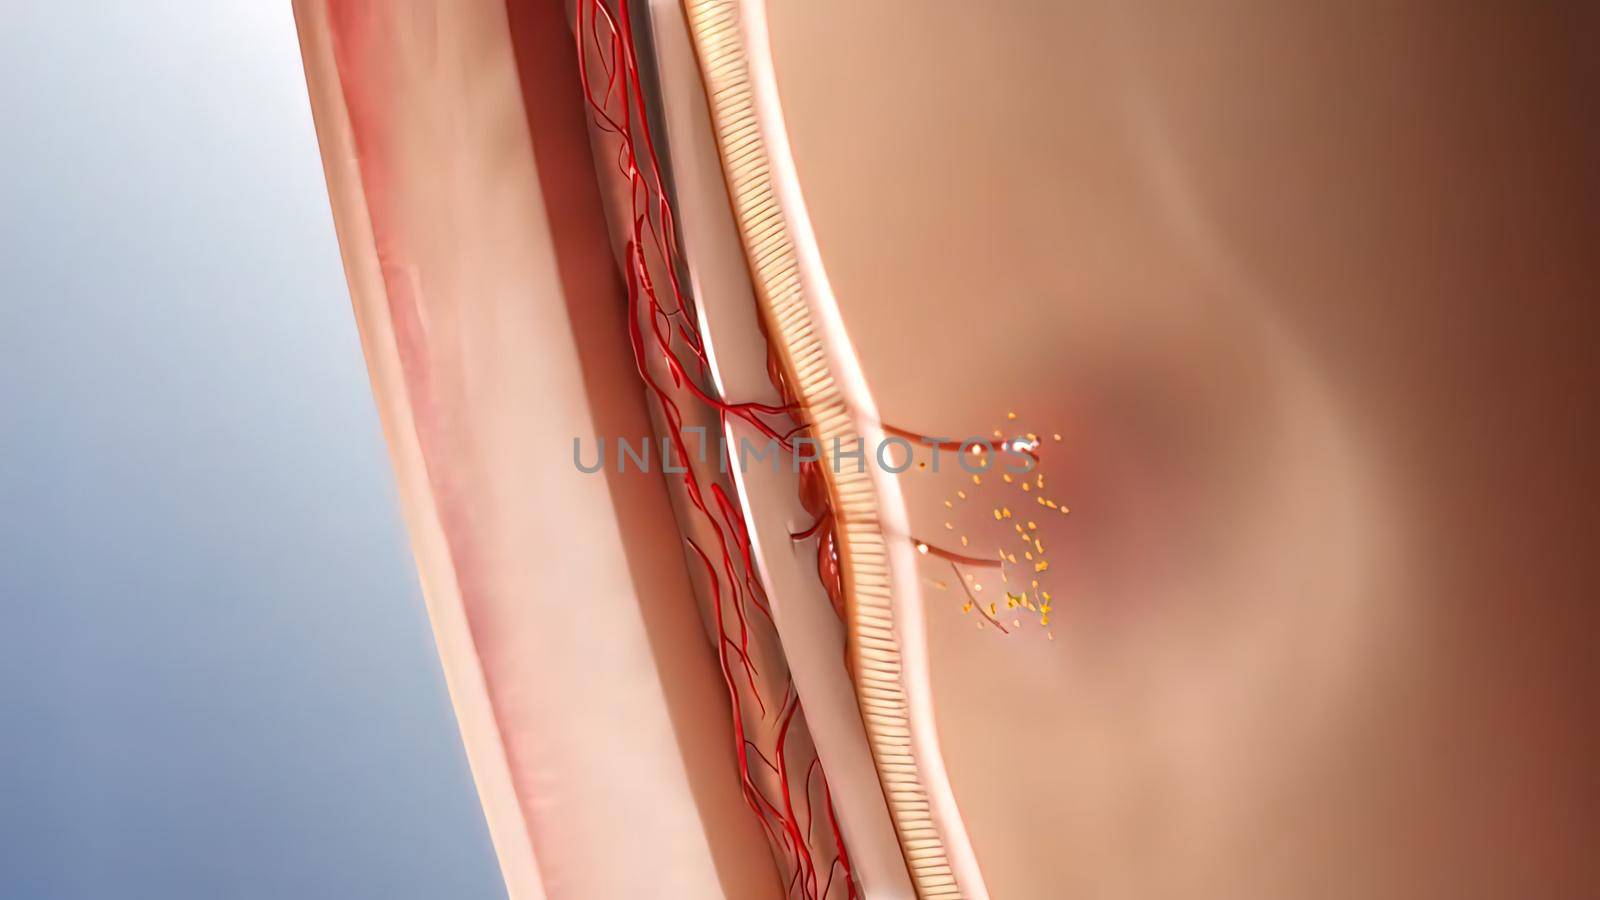 Glaucoma eye disease 3D illustration medical by creativepic